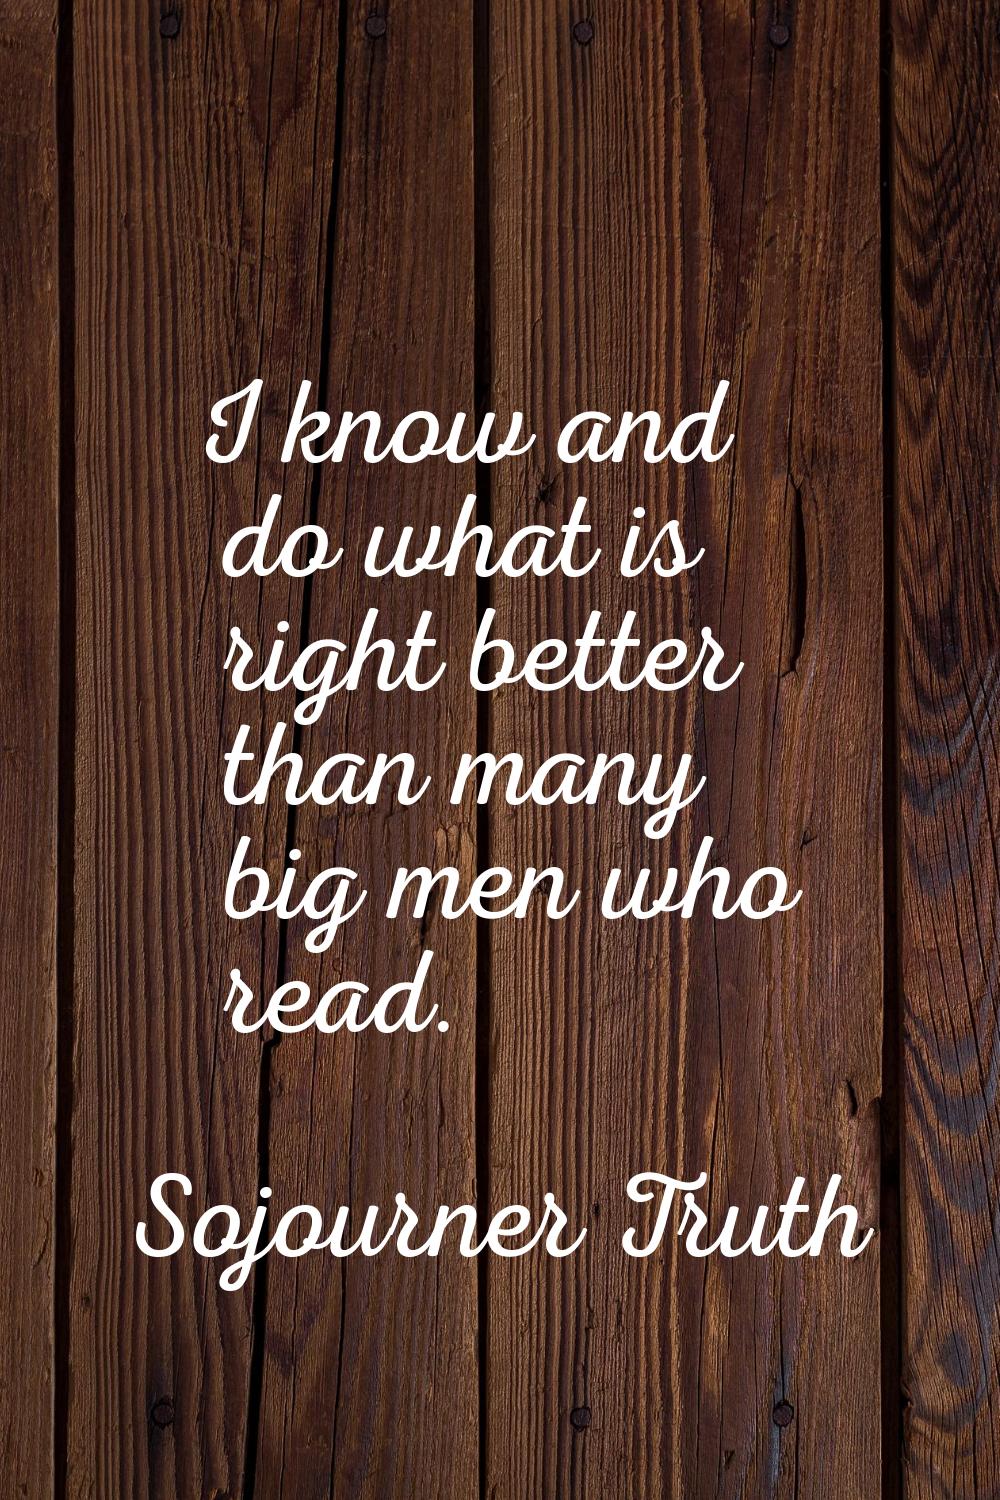 I know and do what is right better than many big men who read.